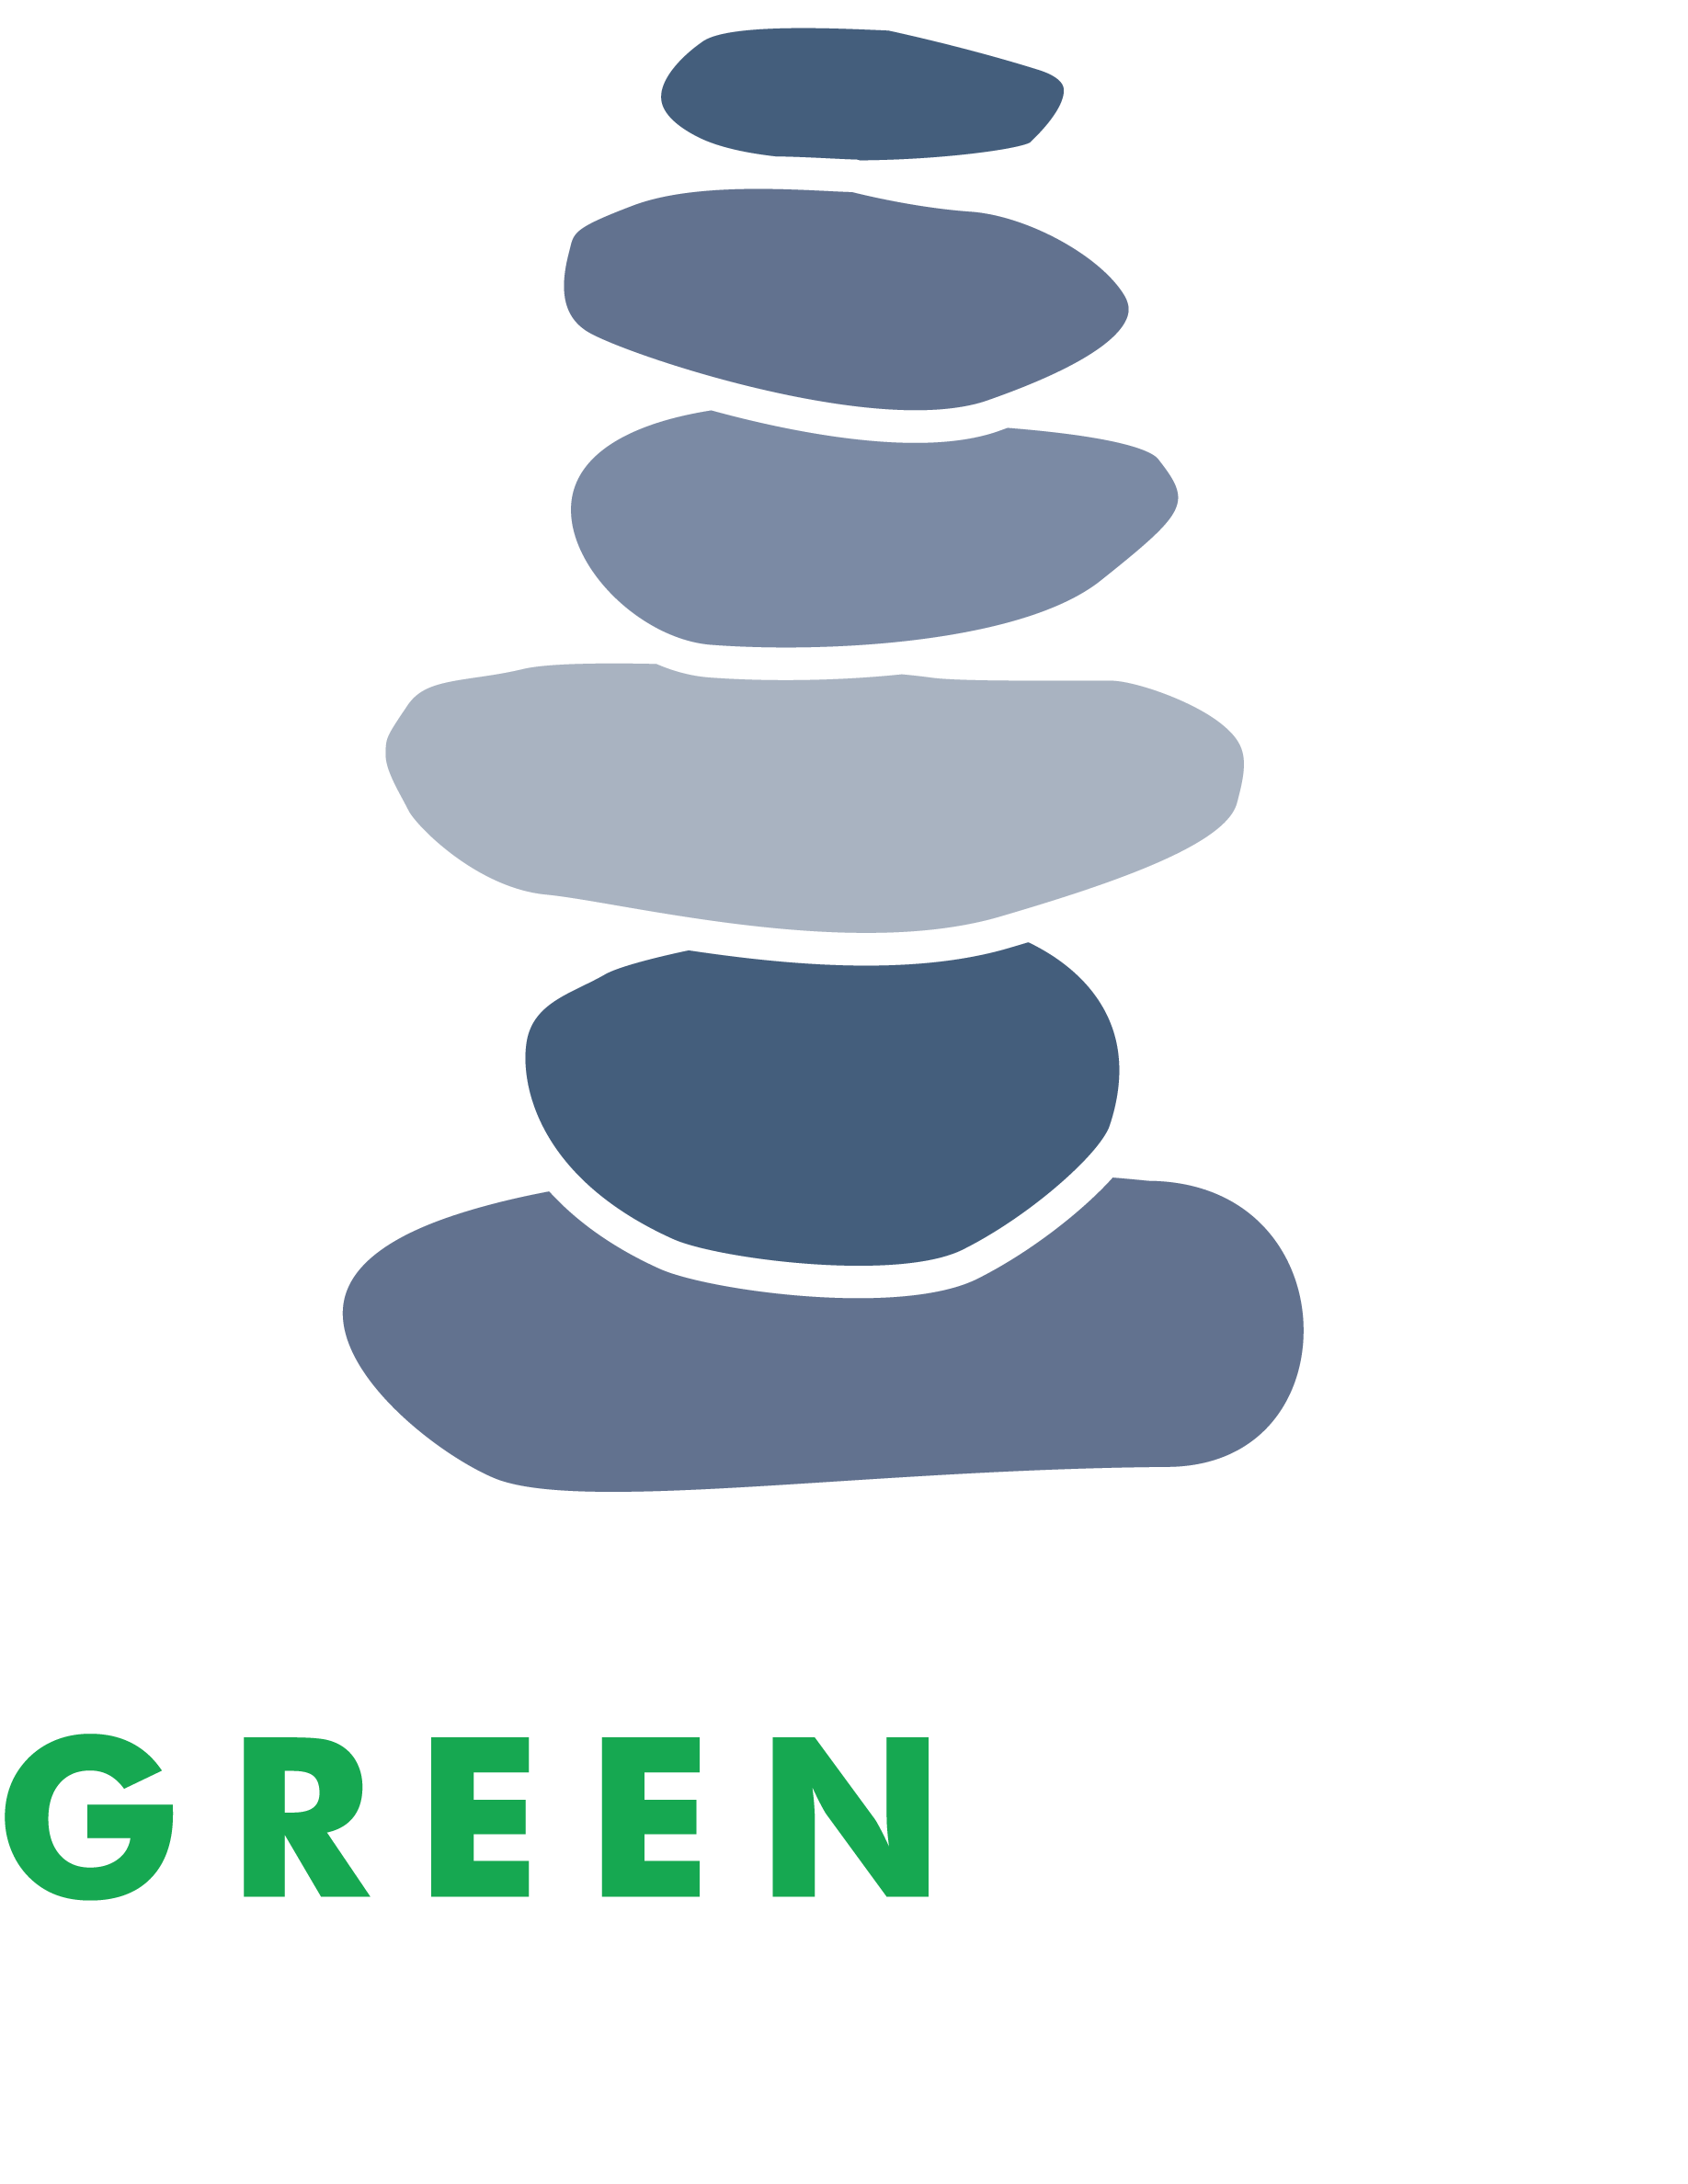 ground clipart greenfield